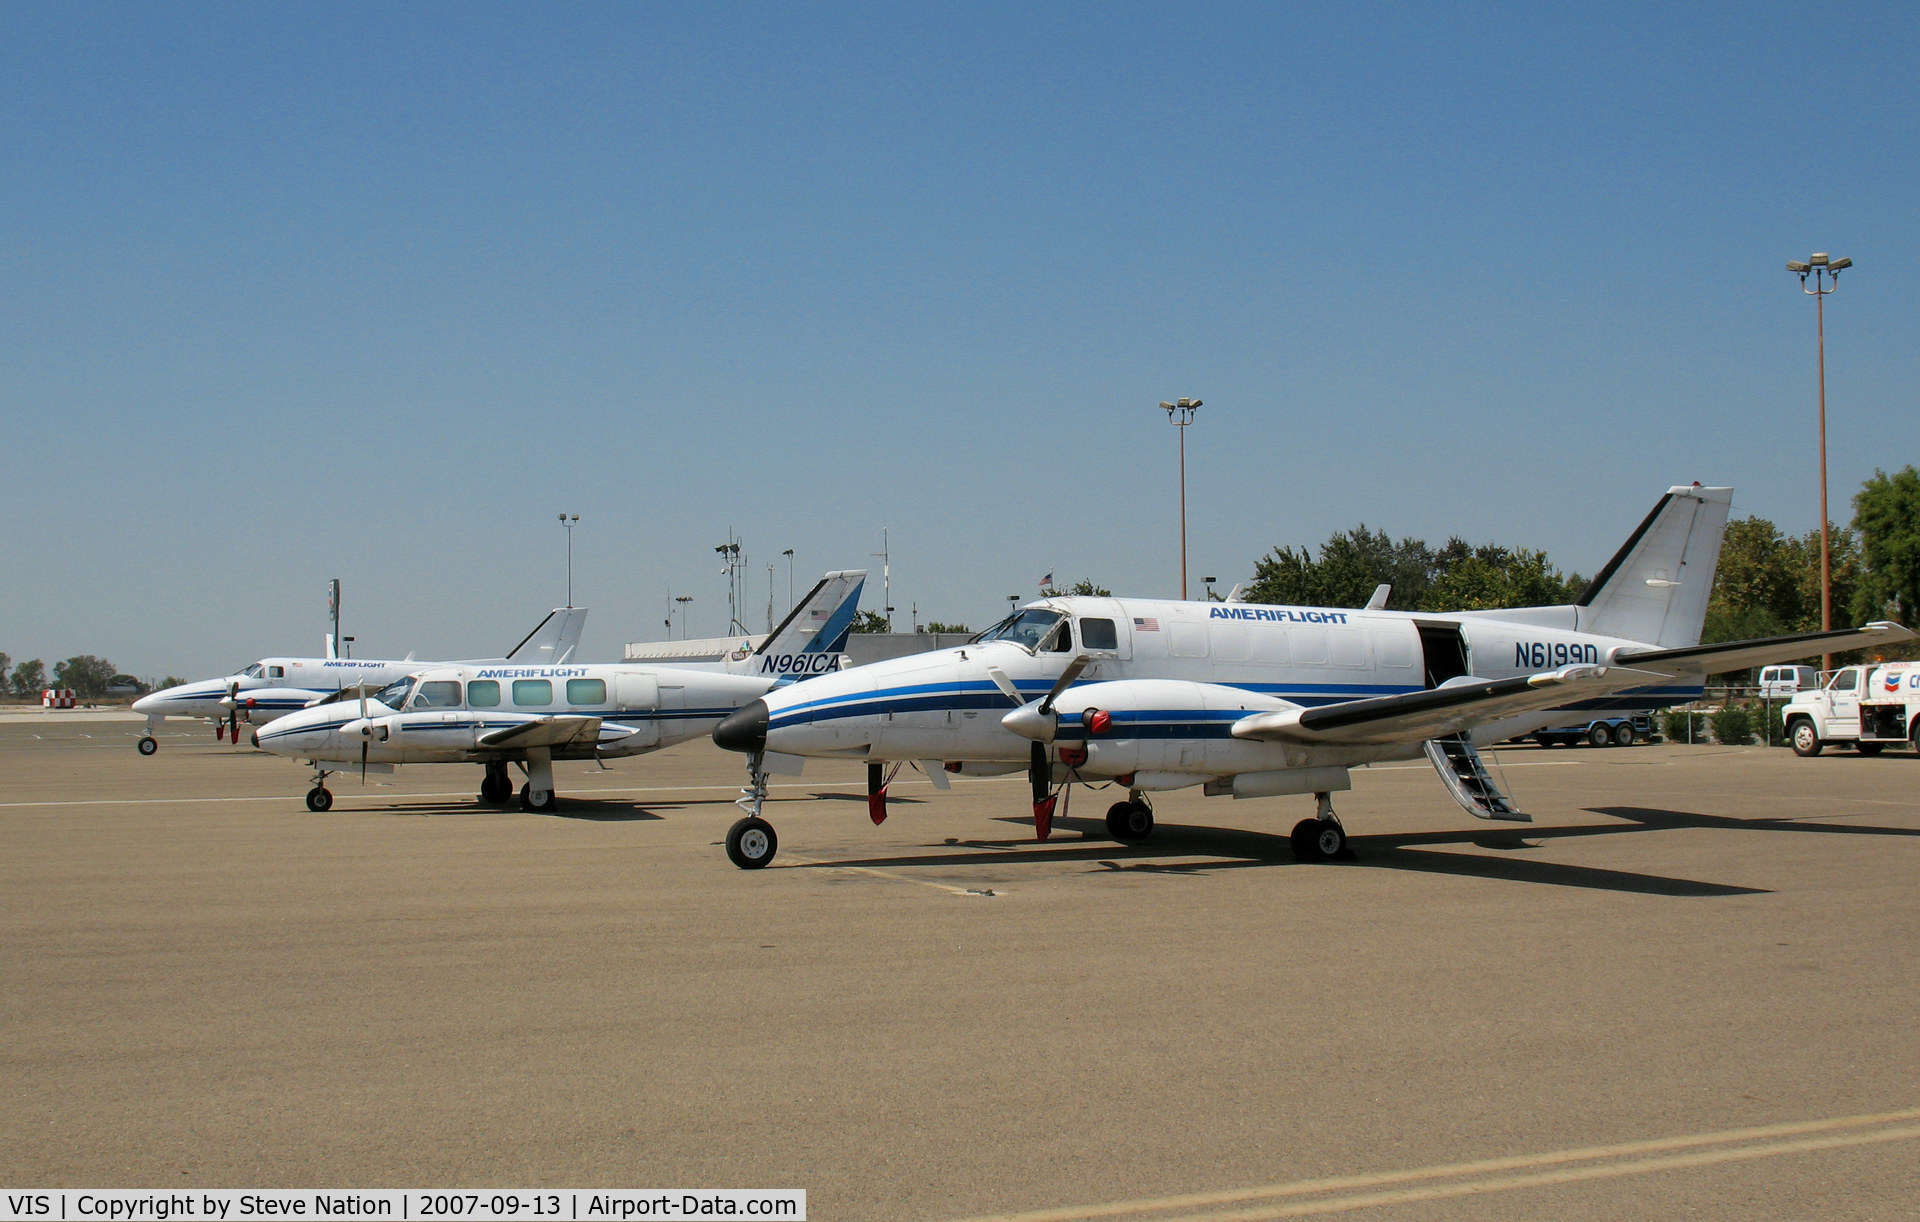 Visalia Municipal Airport (VIS) - Ameriflight small package freighters awaiting deliveries for late afternoon flights to BUR and OAK